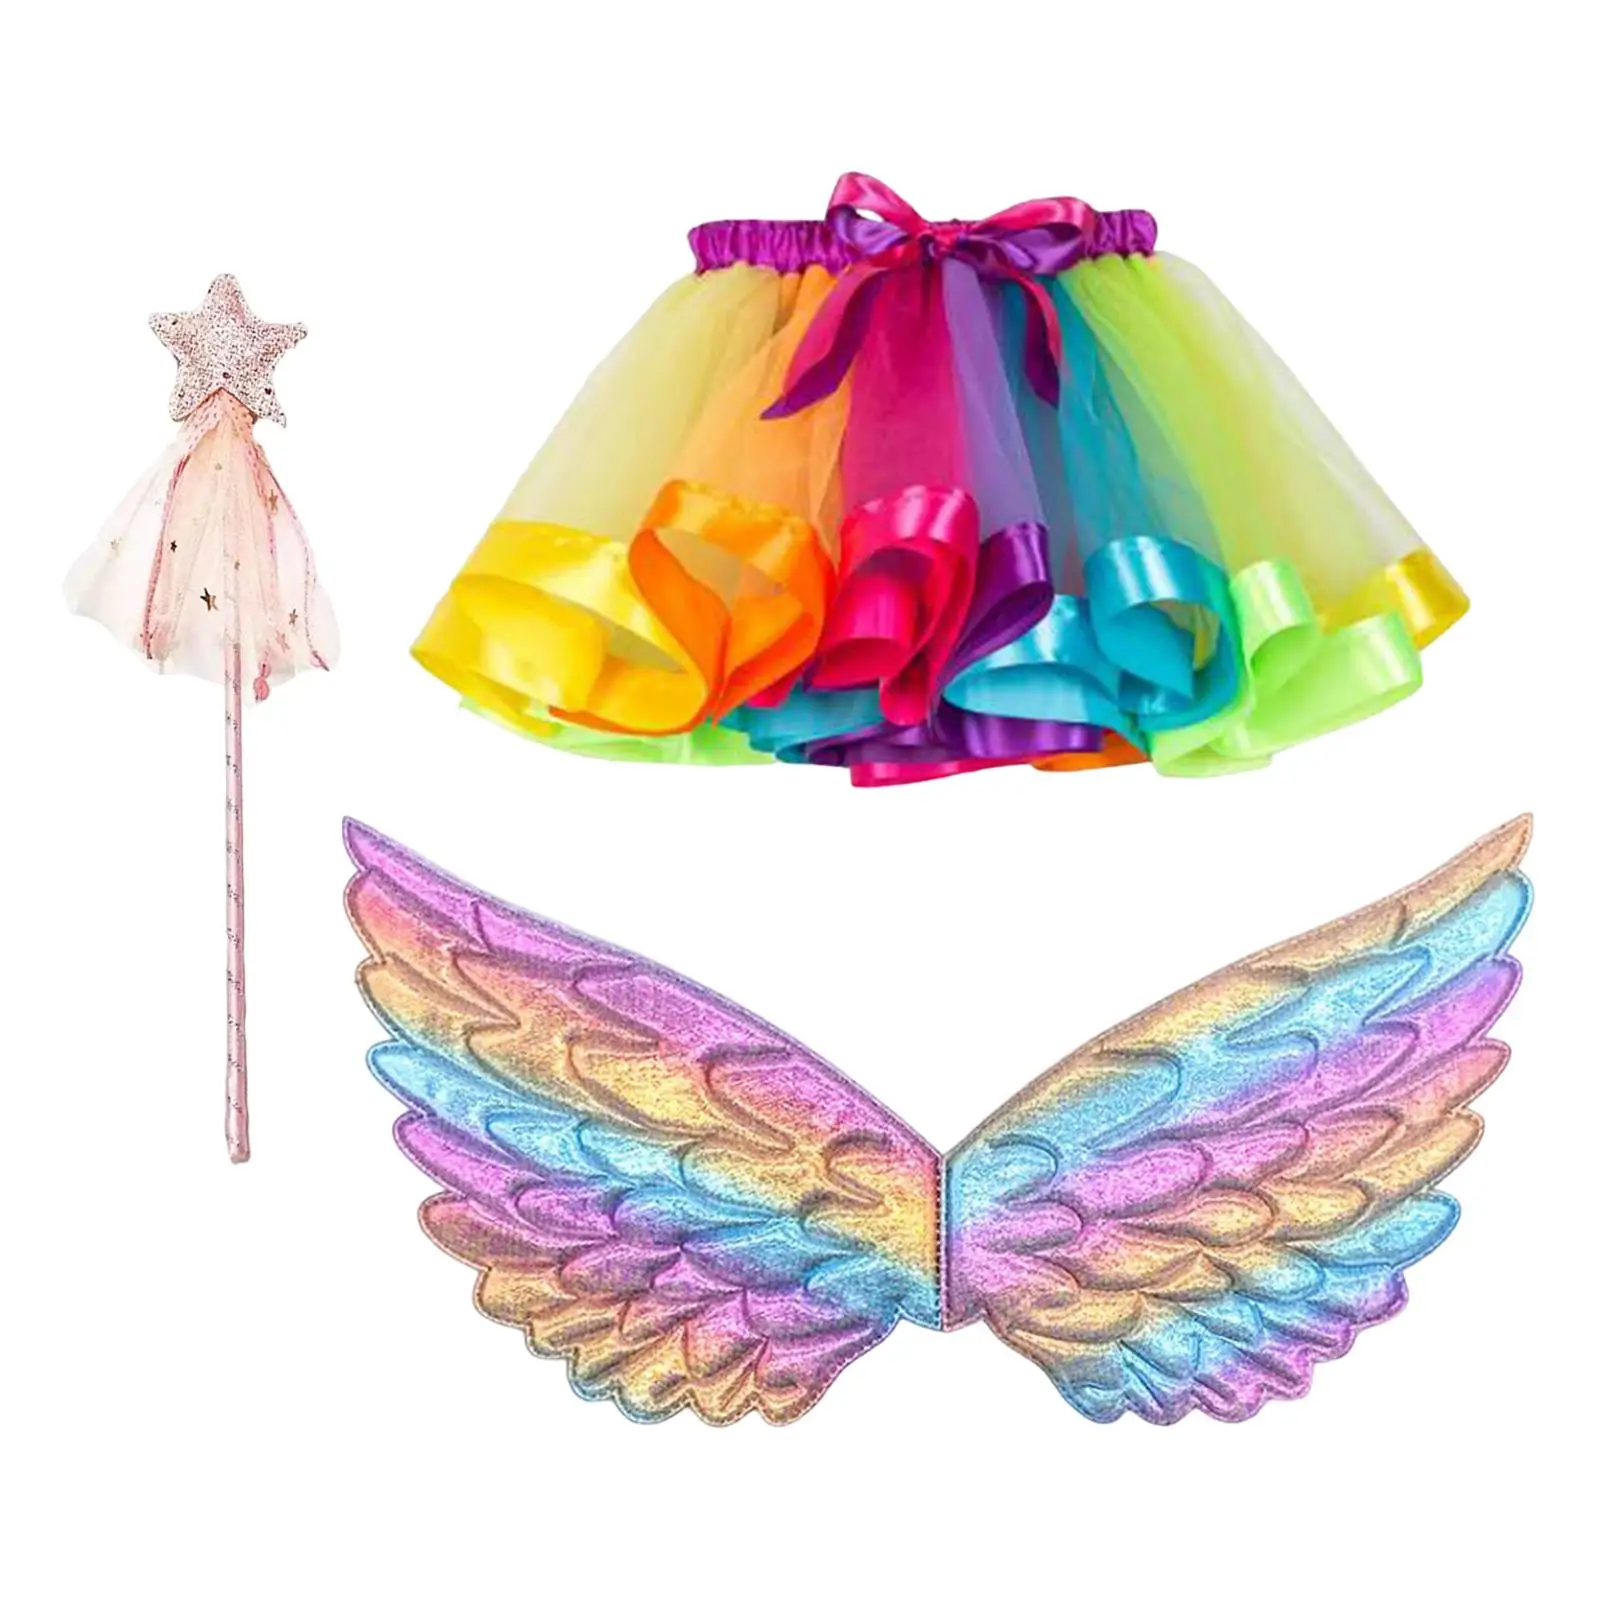 Girls Fairy Costume Set with Butterfly Wing Wand for Photo Prop Cosplay Ballet Dance Halloween Ages 3-6